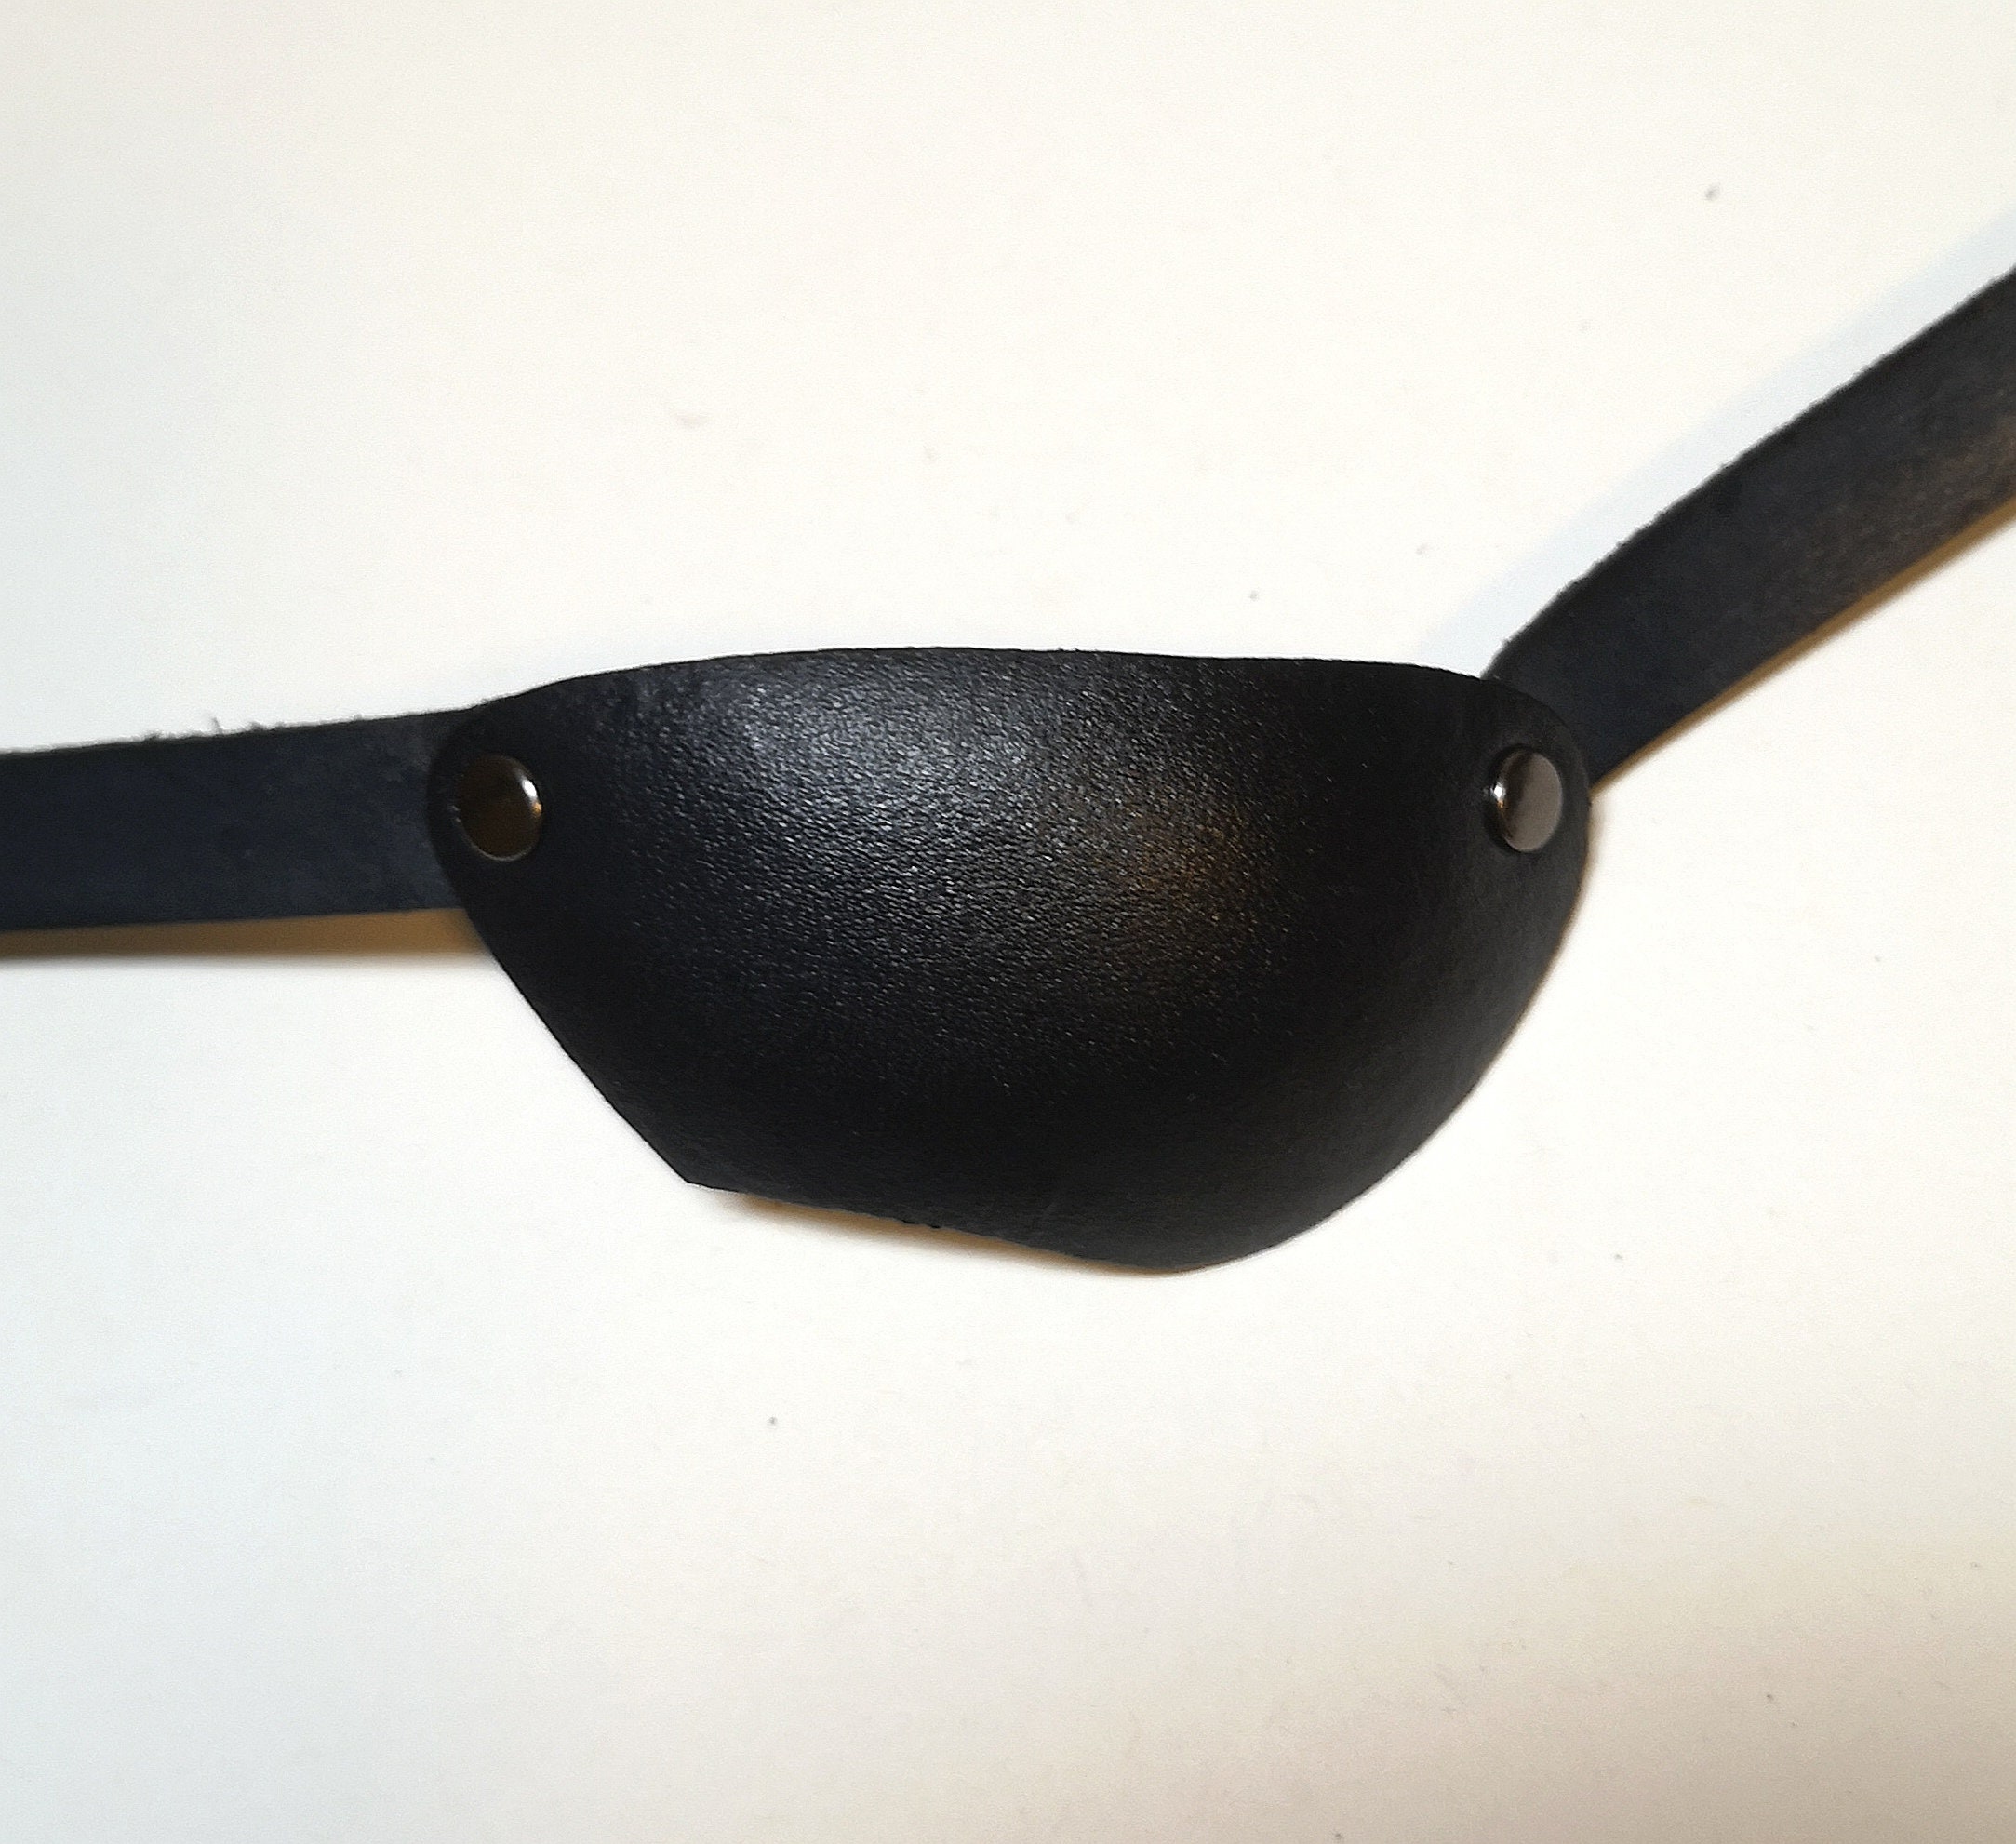 Eye Patch for the Right Eye. Handmade Slim Black Real Leather Eye Patch for  adults. Suitable for Permanent Use. Medical Eyepatch.